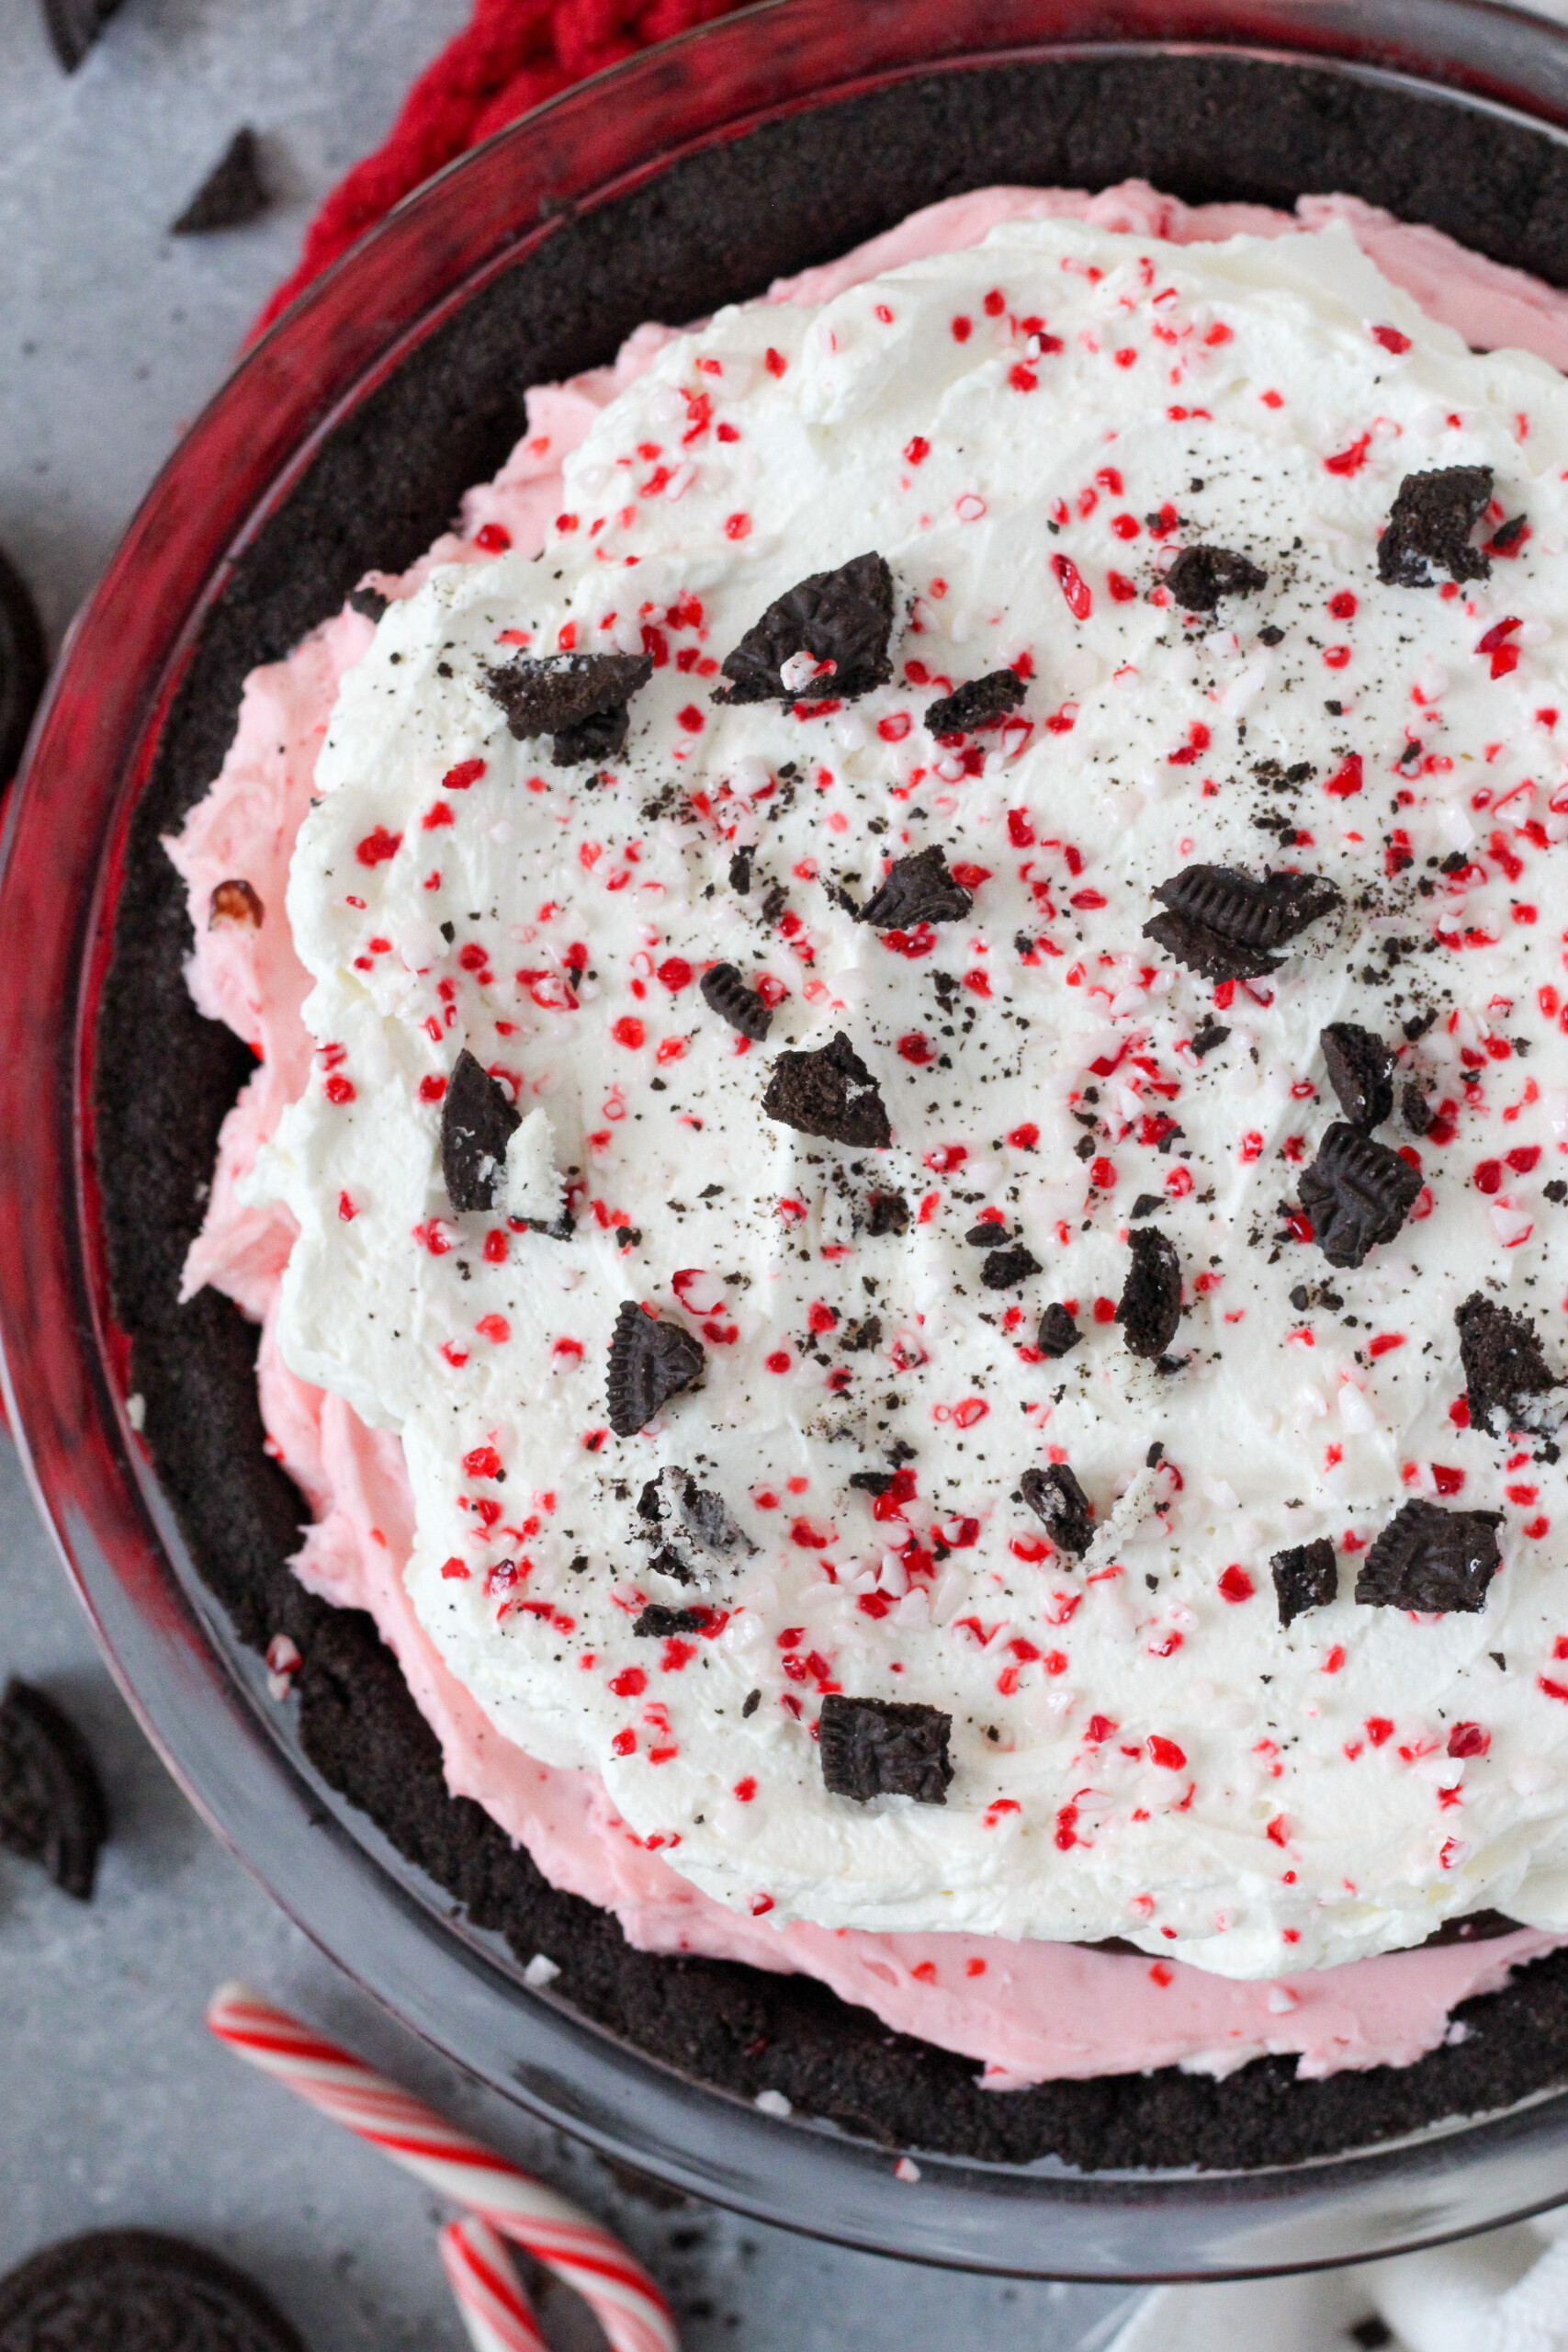 Picture of peppermint pie with Oreos on top.